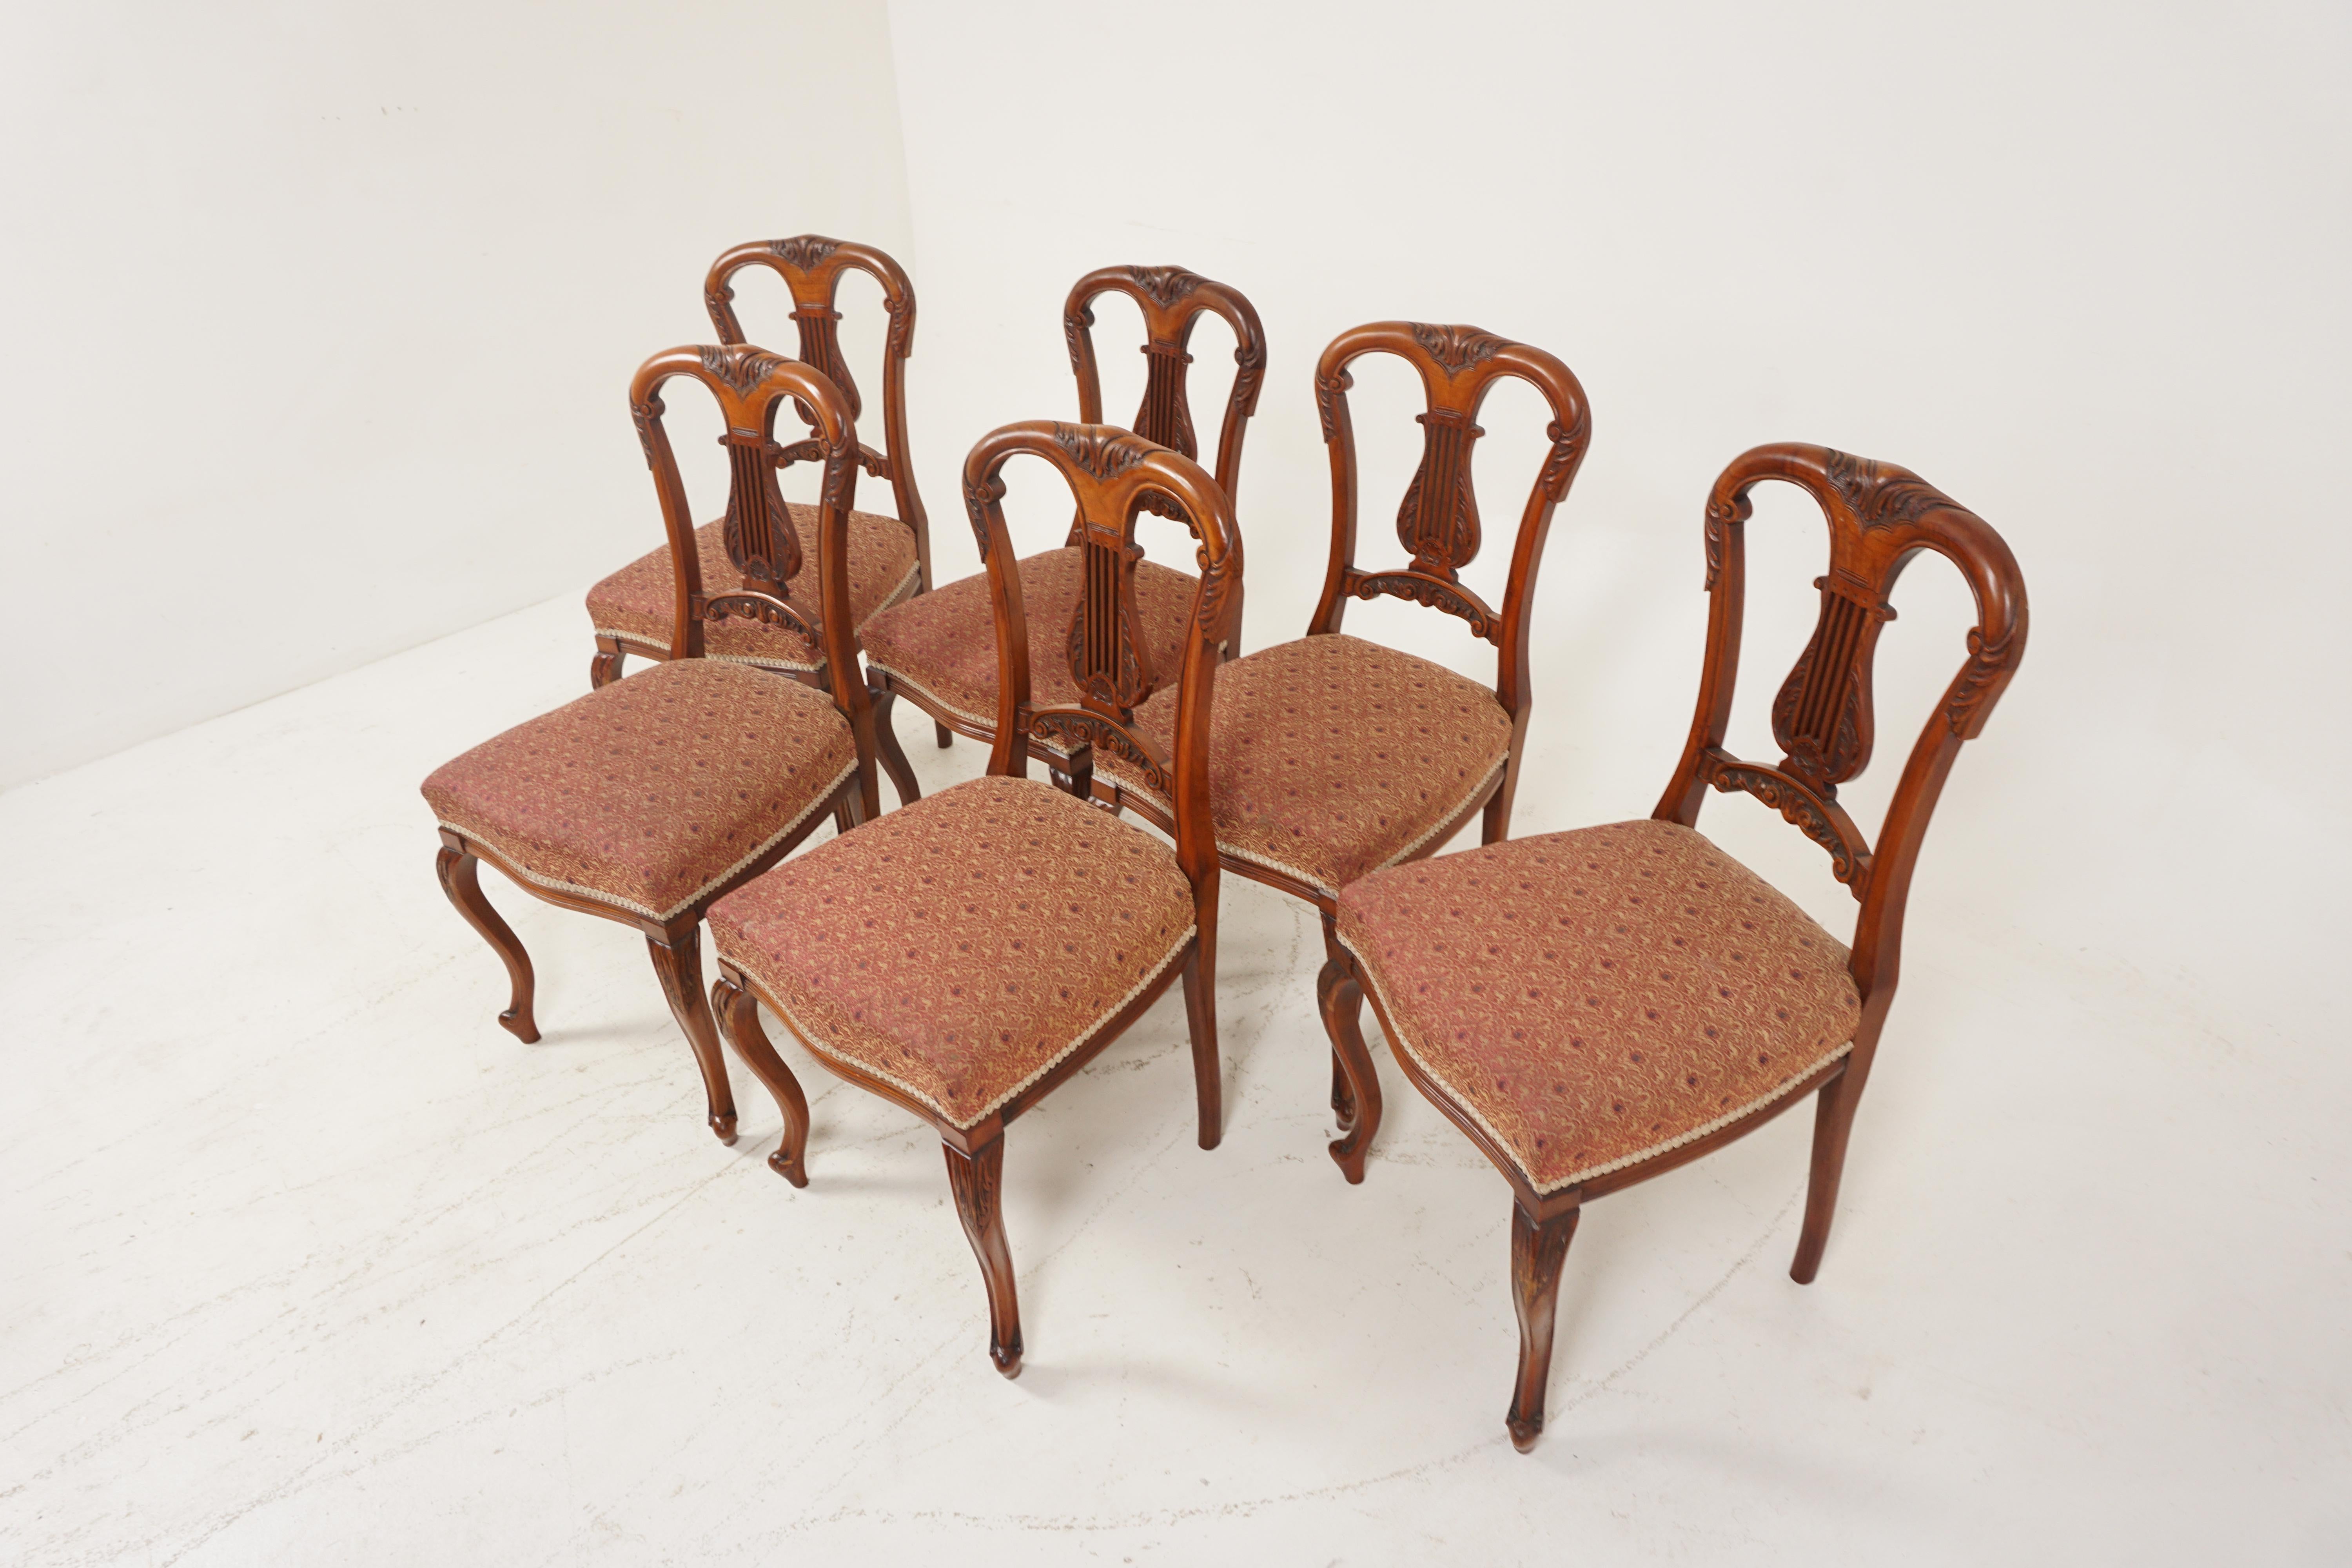 Scottish Set of 6 Antique Victorian Carved Walnut Dining Chairs, Scotland 1890, H223